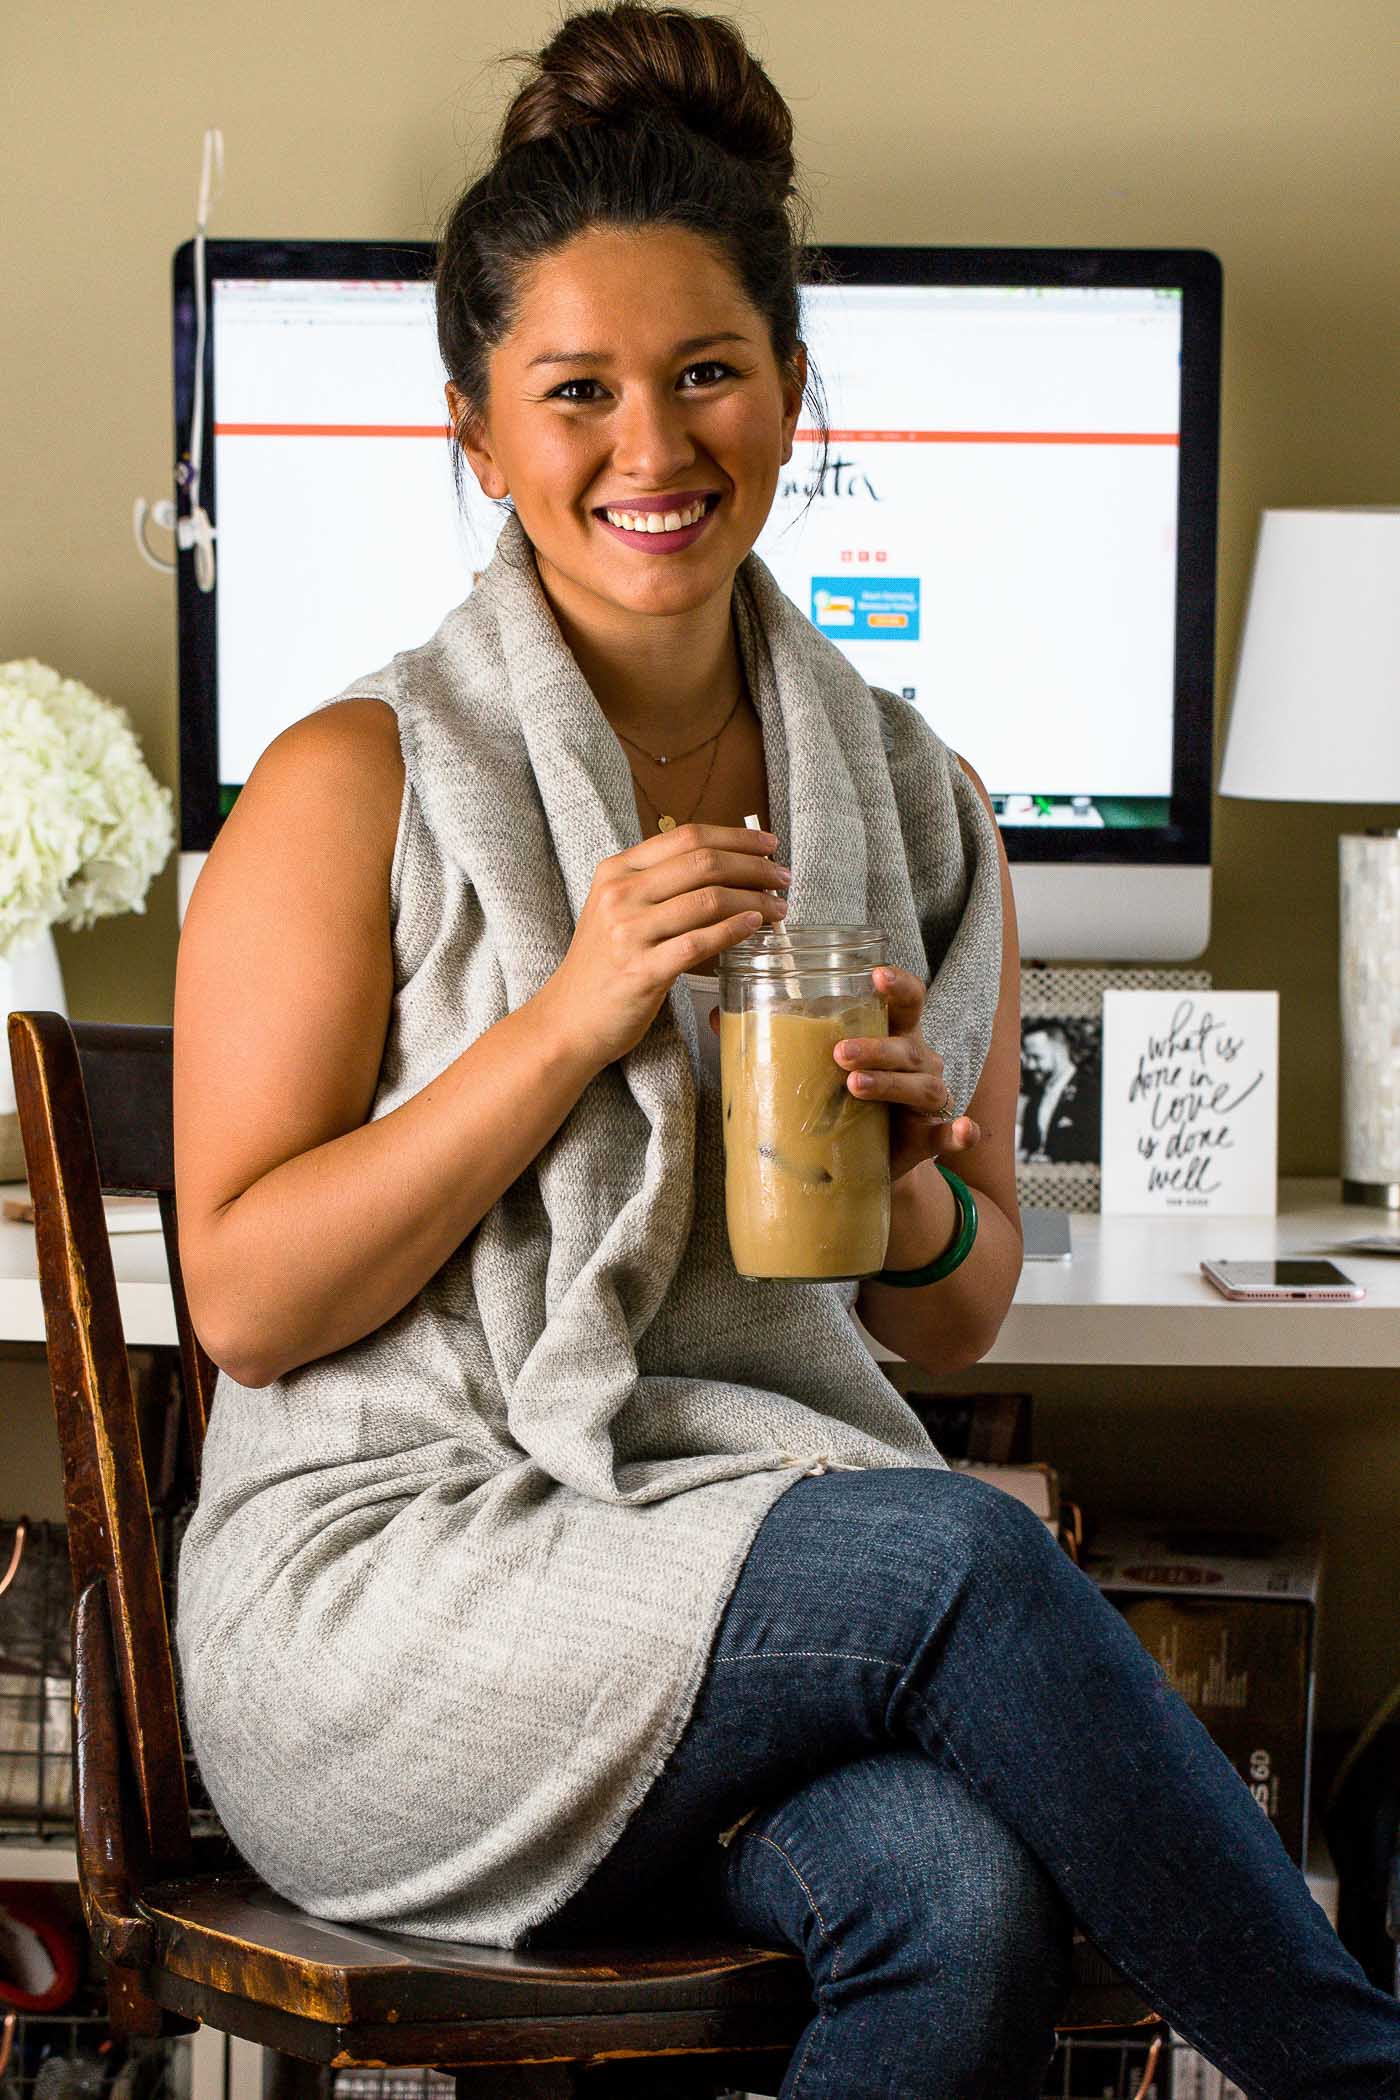 5 tips for a healthy & productive morning while working from home, plus a bonus chocolate coconut cold brew overnight oats recipe! #playswellwithbutter #creativepreneur #workfromhome #morningroutine #healthymorning #healthybreakfast #easybreakfastrecipe